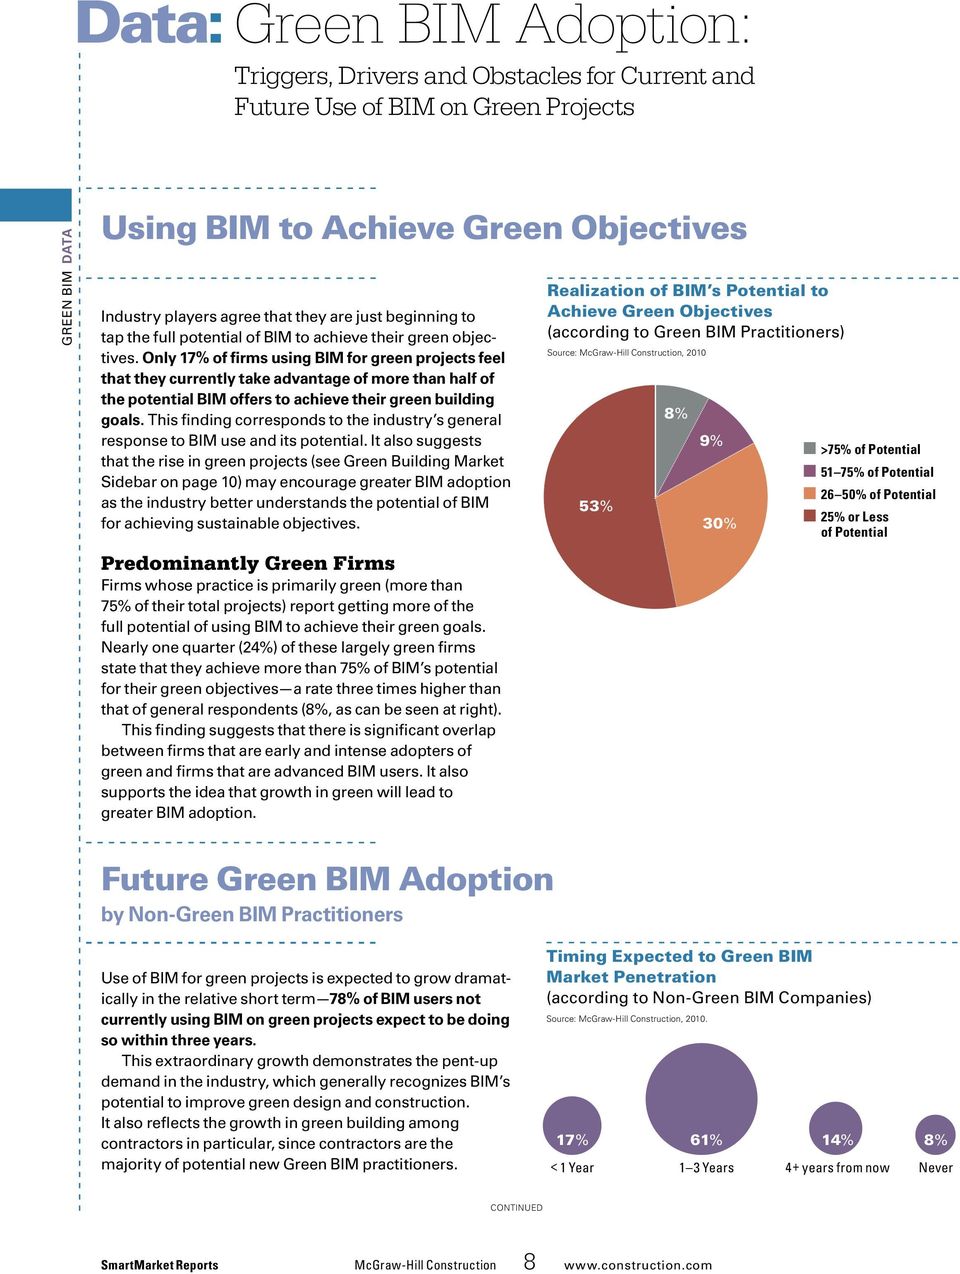 Only 17% of firms using BIM for green projects feel that they currently take advantage of more than half of the potential BIM offers to achieve their green building goals.